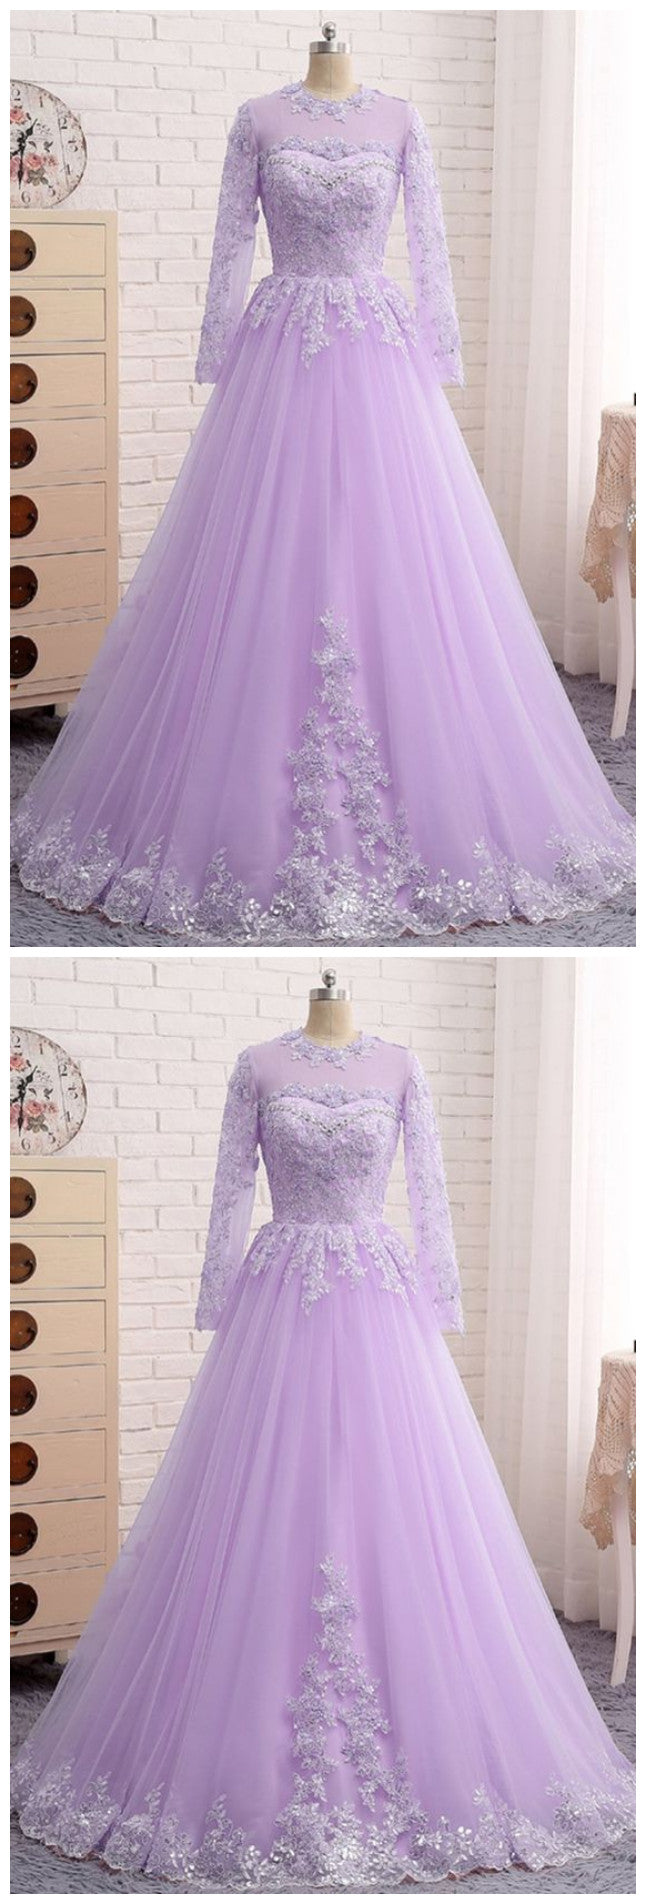 Modest Lilac Tulle Prom 8th Grade Dance Dress with Sleeves - Dollygown